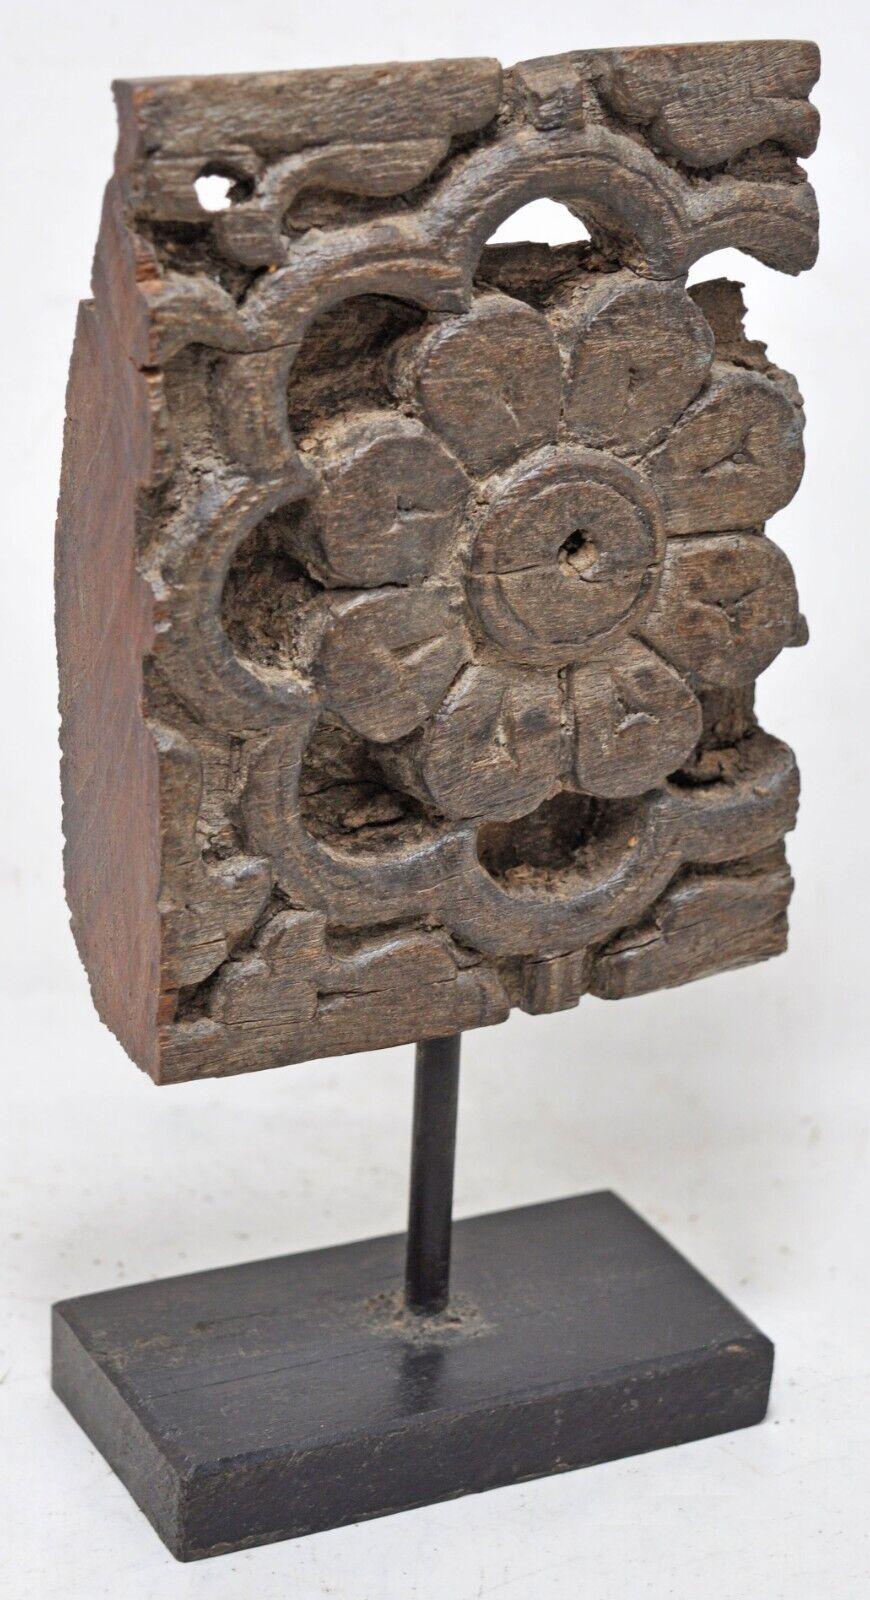 Collection of 3 South Asian Antique Architectural Fragments on Stands

Anonymous
Southern Asia, probably India; first-half of the 20th century
Wood

Approximate sizes: 

7.2 x 2.2 x 9.2 in.; 
4.4 x 2.2 x 9 in.; 
6 x 3 x 9 in.

The present group of